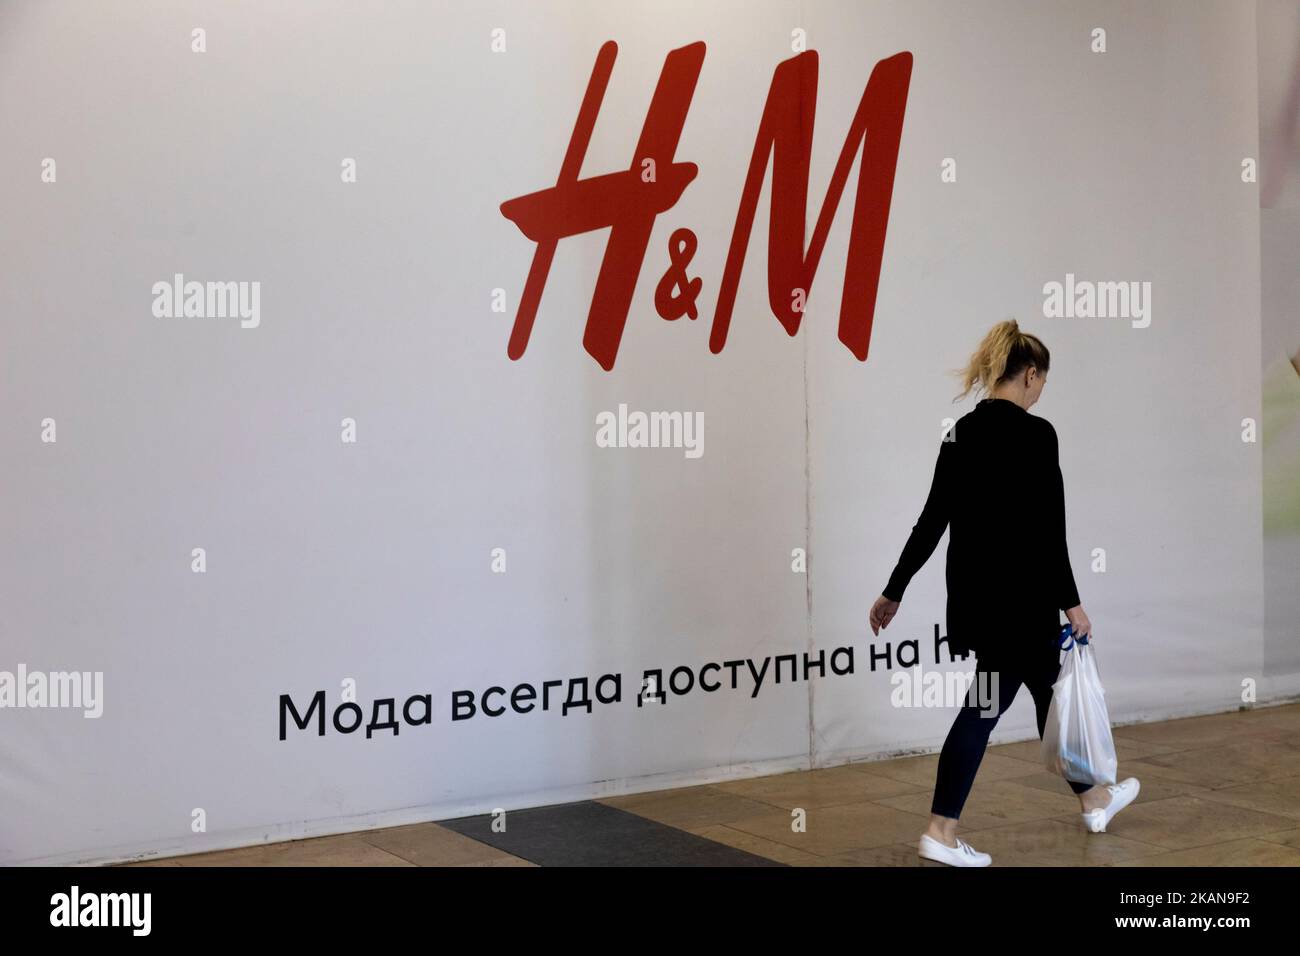 H&m interior hi-res stock photography and images - Alamy